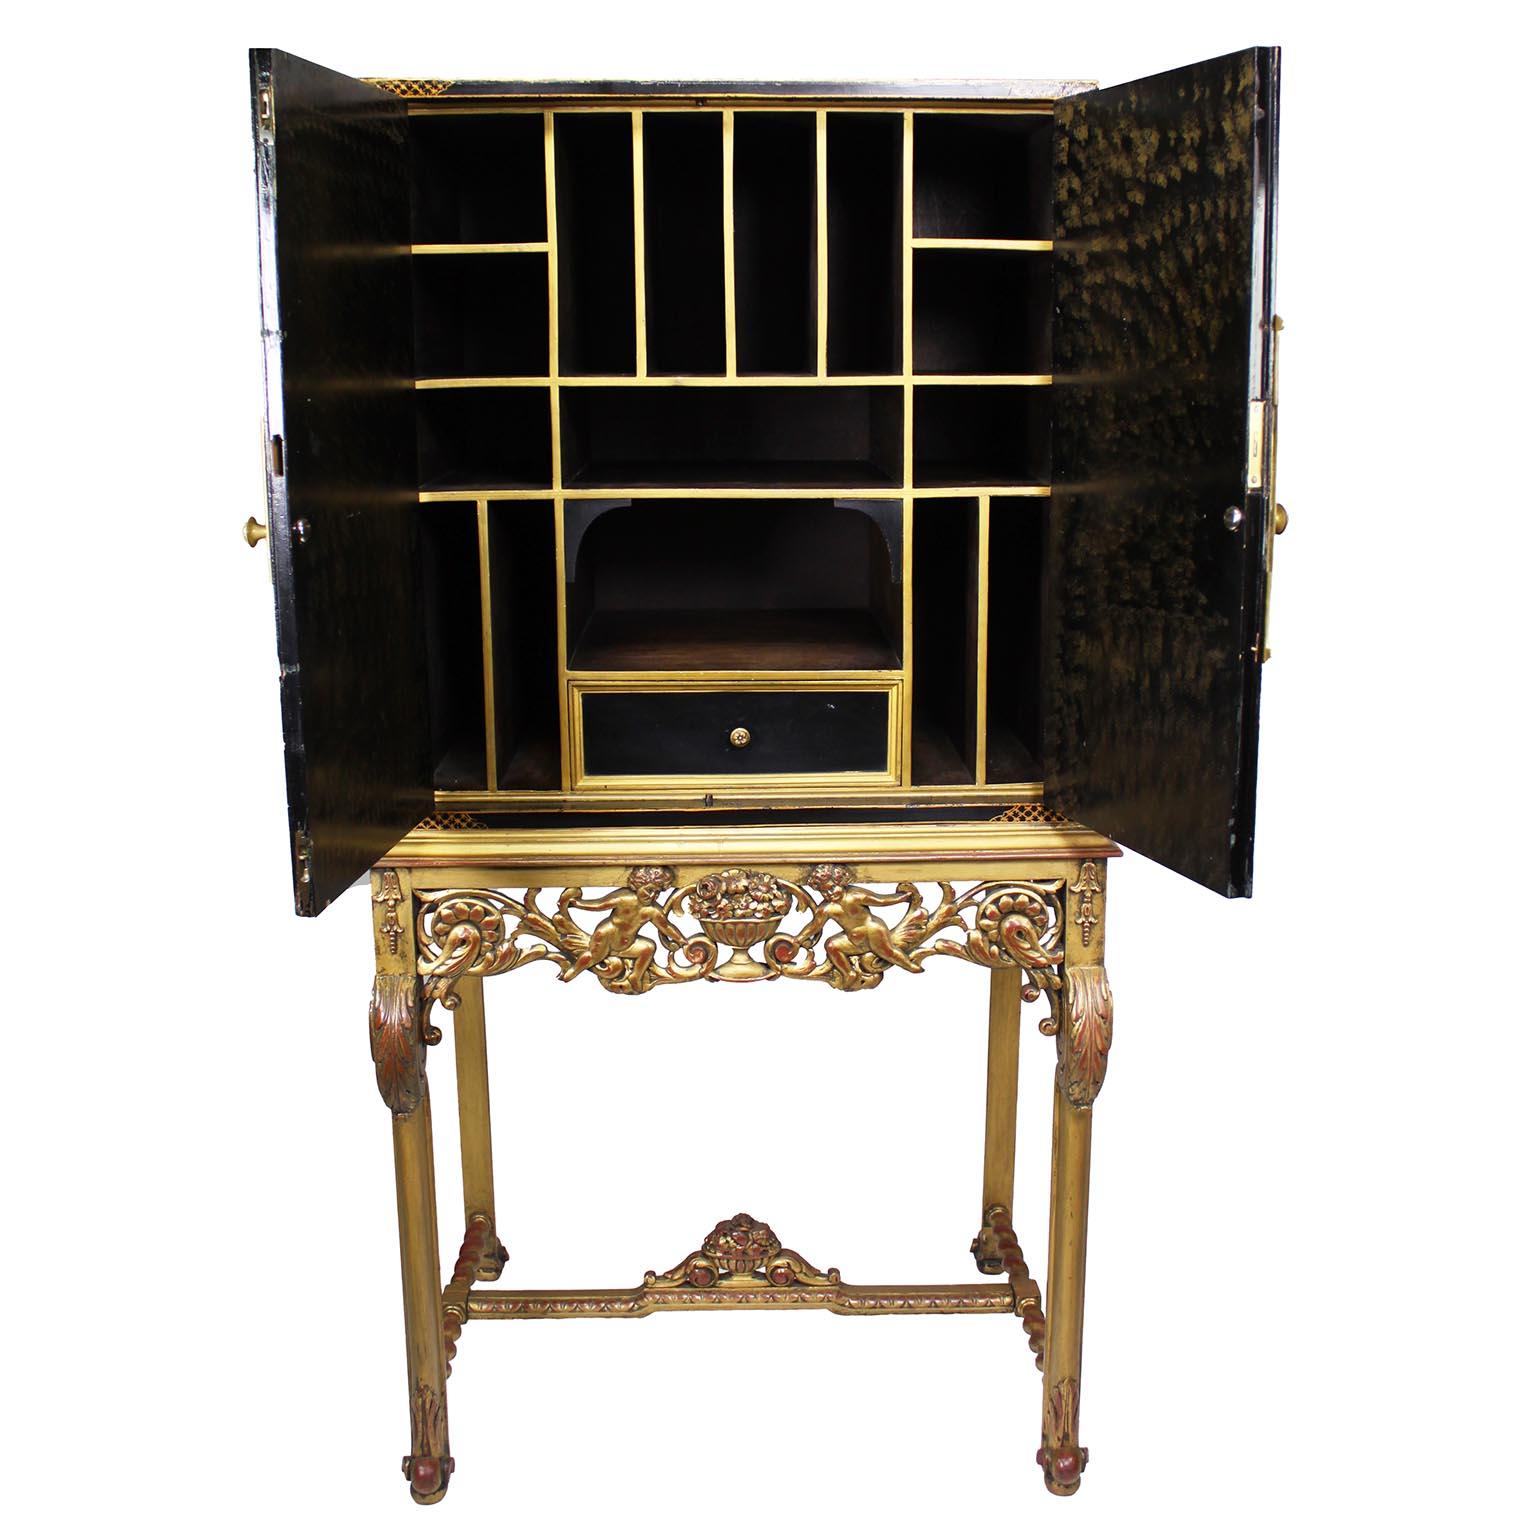 British A Franco-English 19th/20th Century Chinoiserie Style Two-Door Cabinet on Stand For Sale